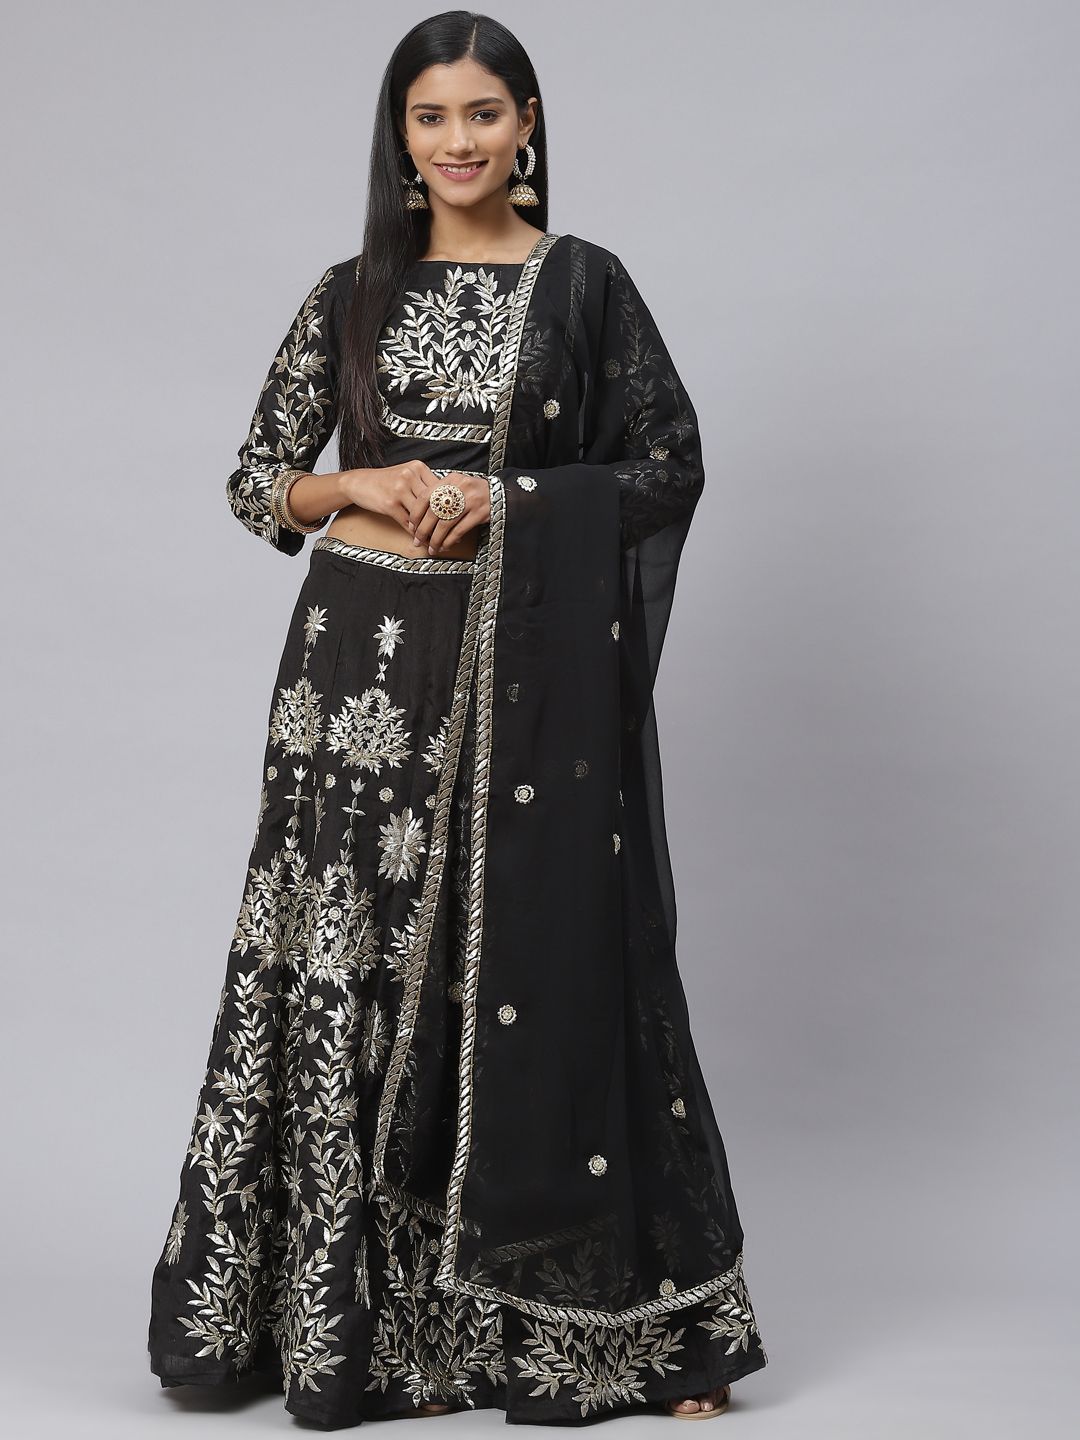 Readiprint Fashions Black & Silver-Toned Embroidered Semi-Stitched Lehenga & Unstitched Blouse With Dupatta Price in India